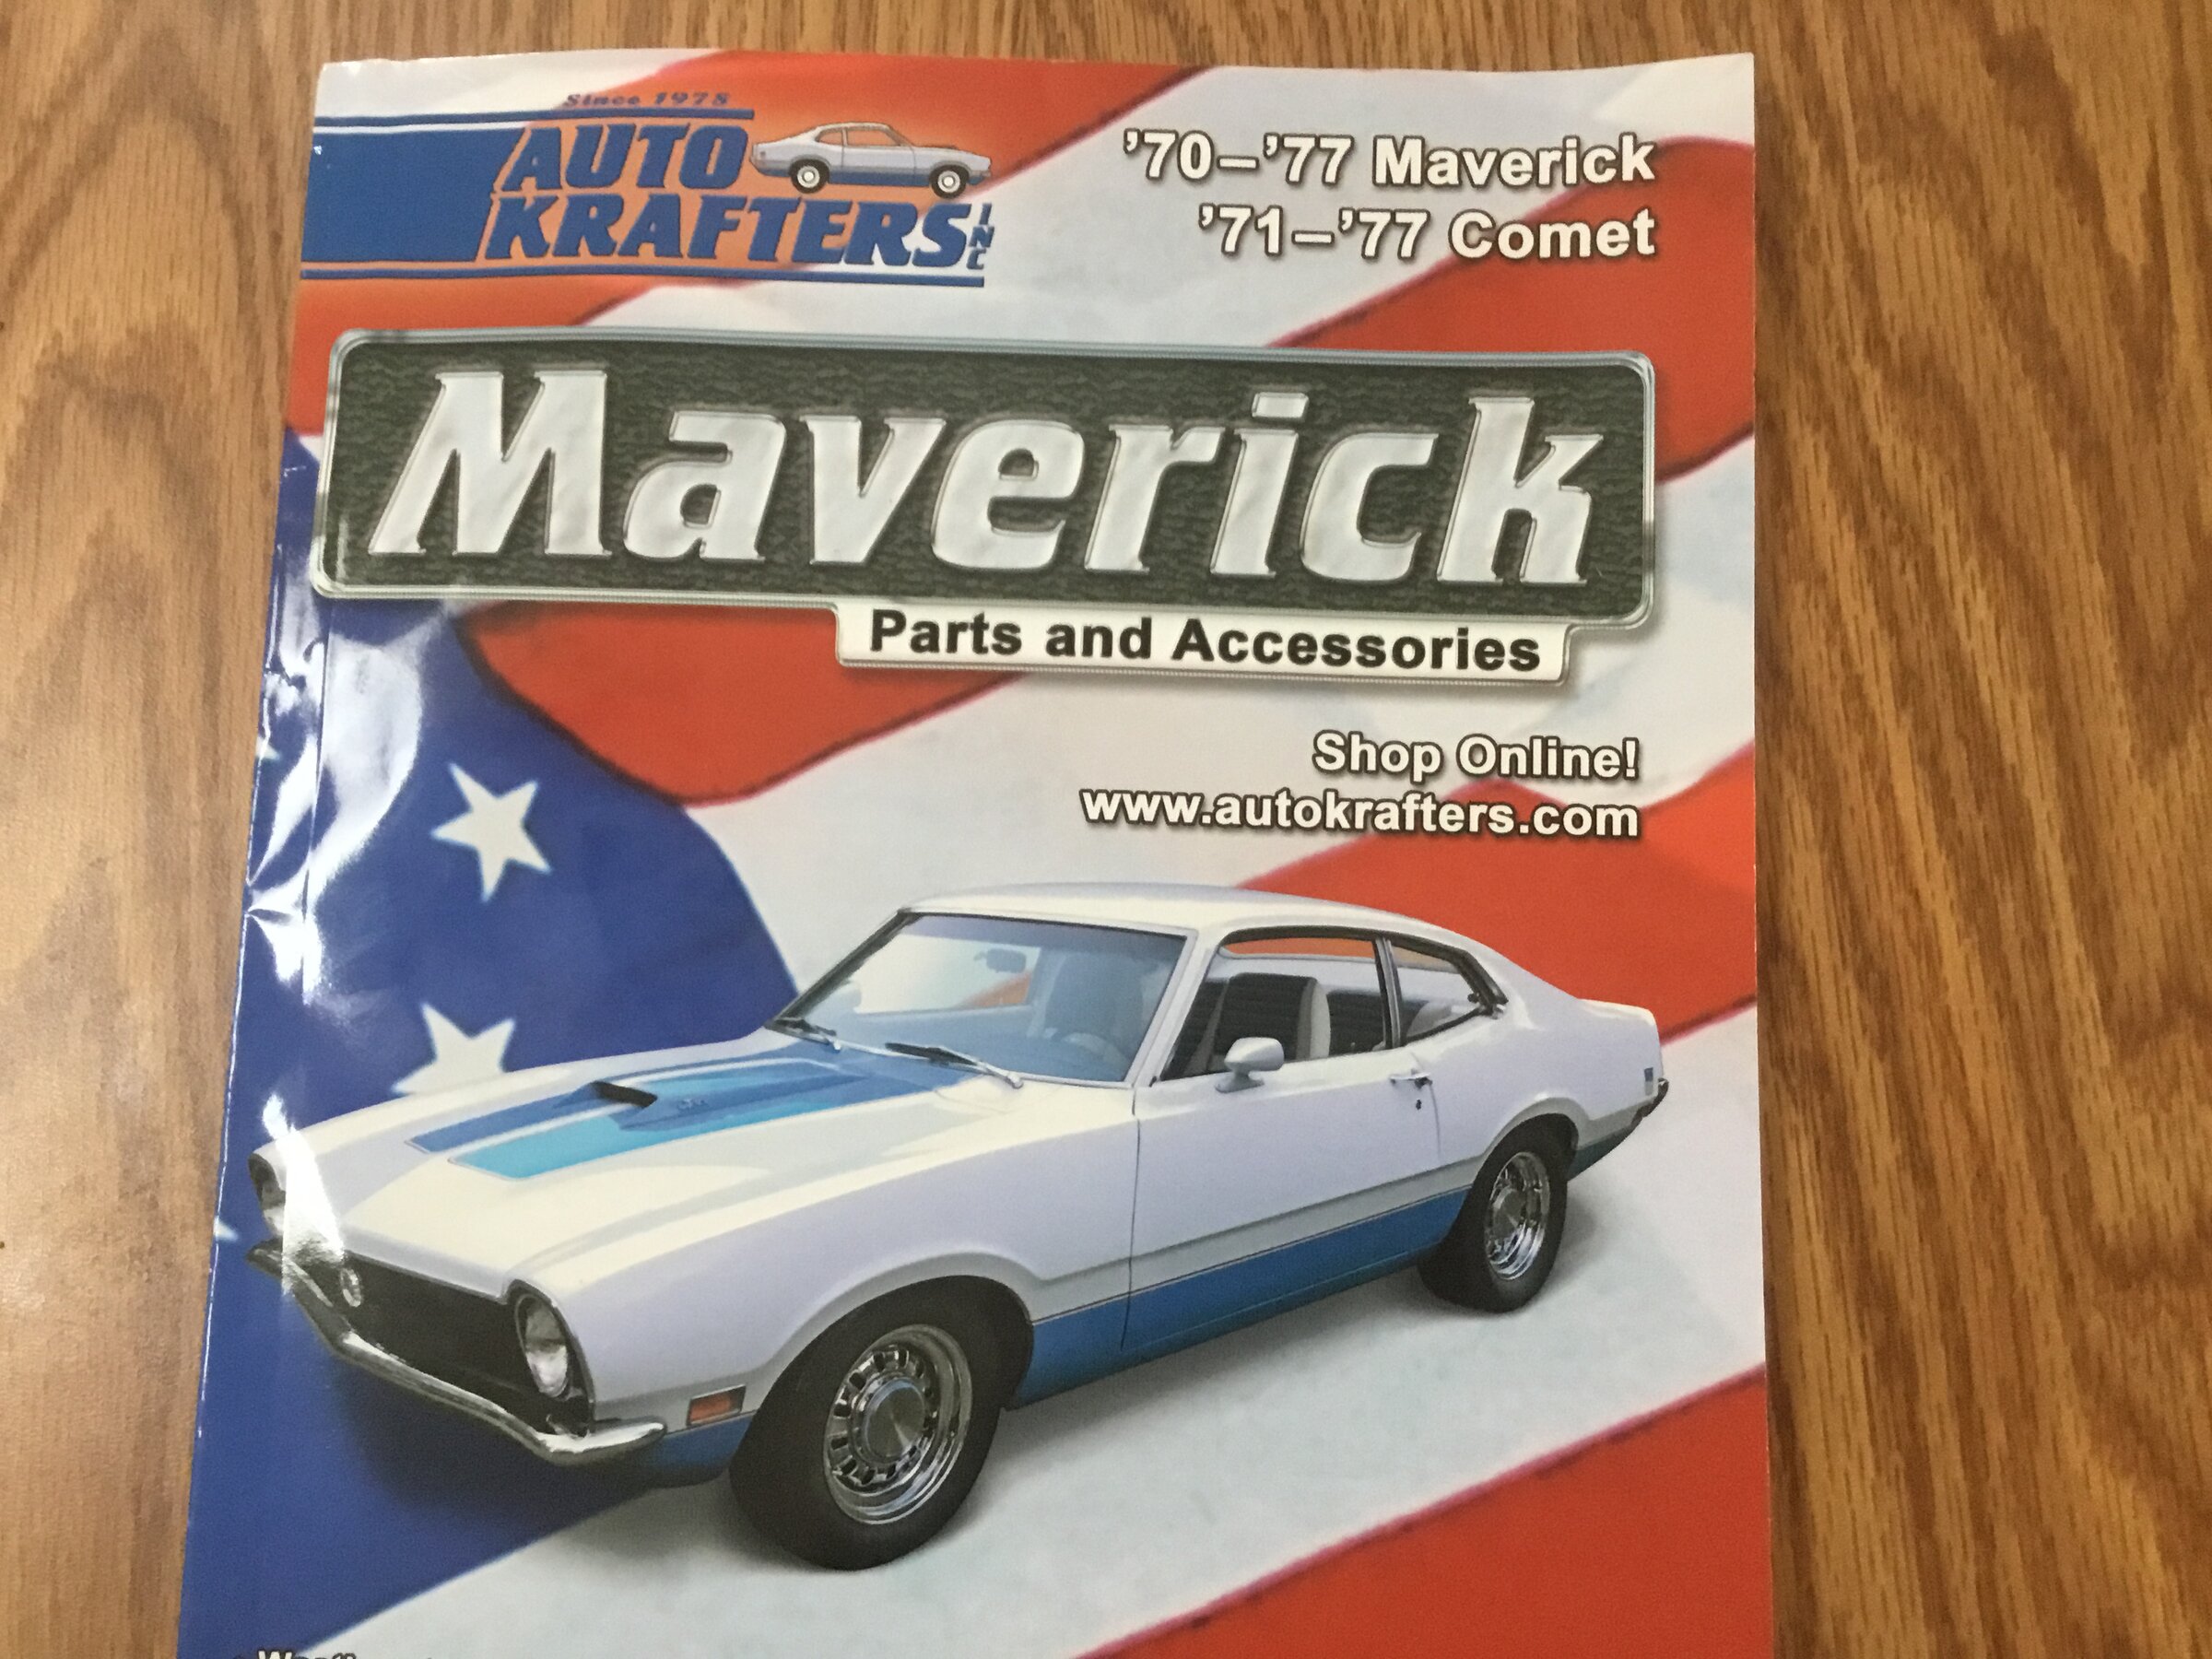 Ford Maverick Got this in the mail today…… E29C6896-0F5D-4B7A-8B28-3F1A7175DC60